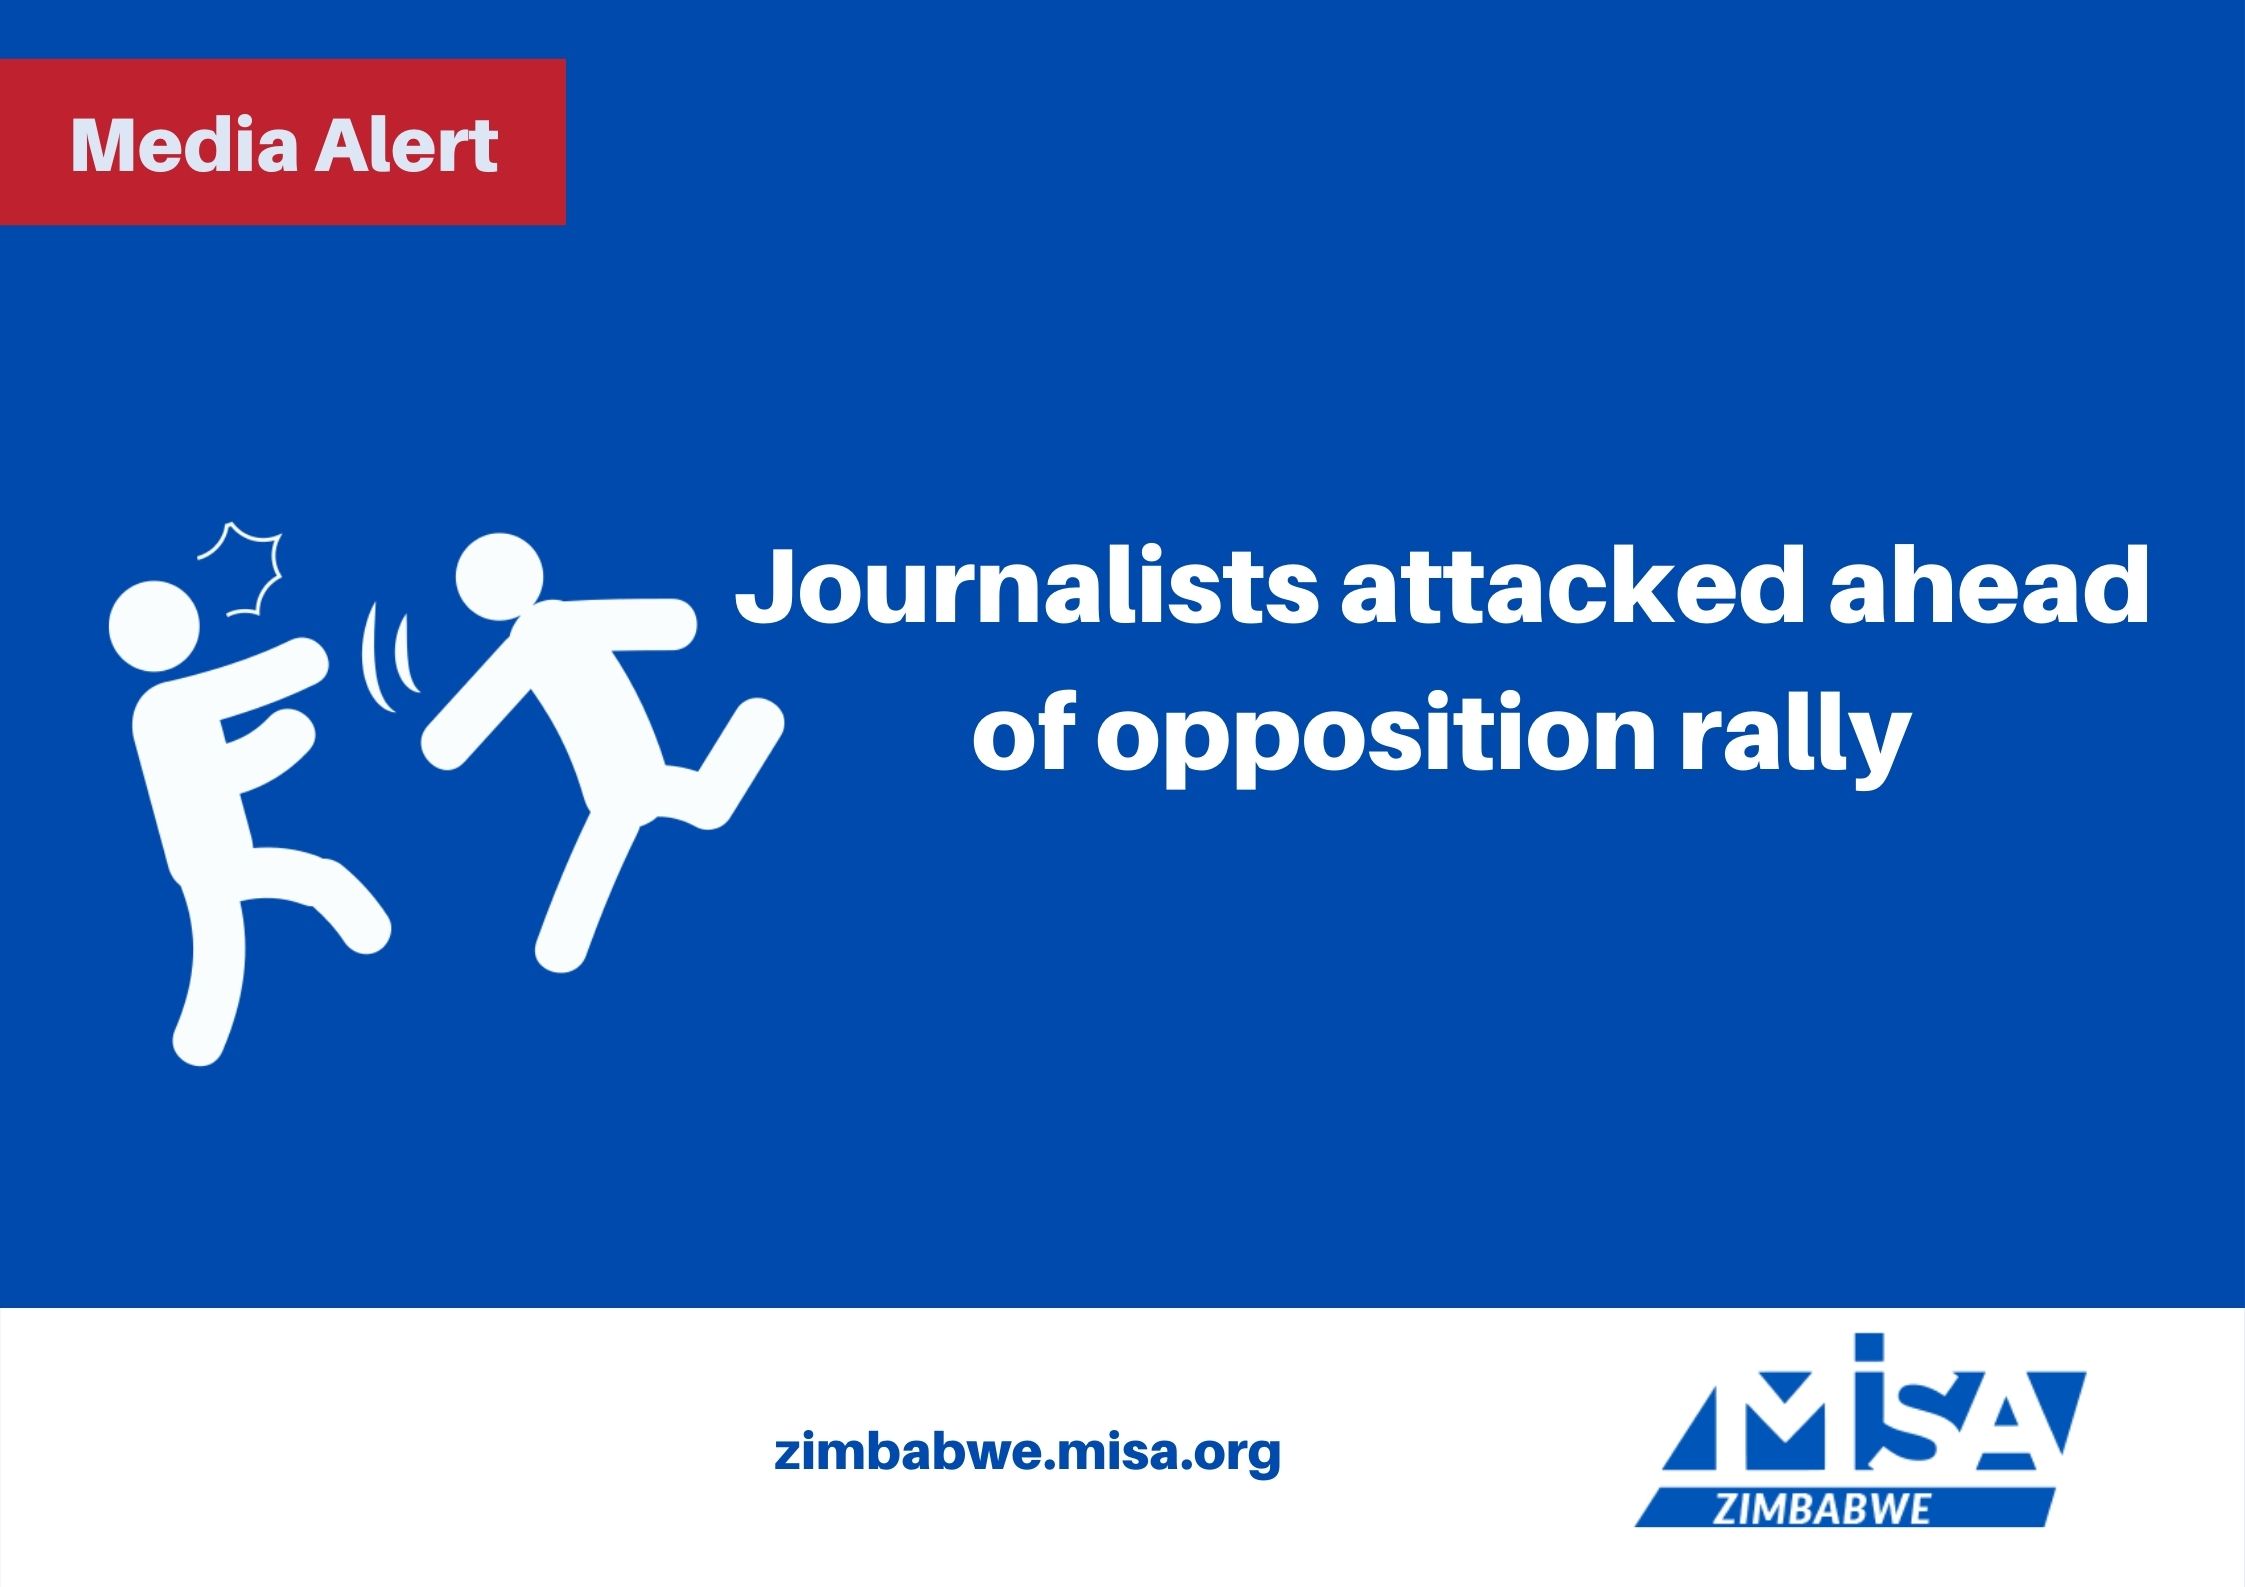 Journalists attacked ahead of opposition rally